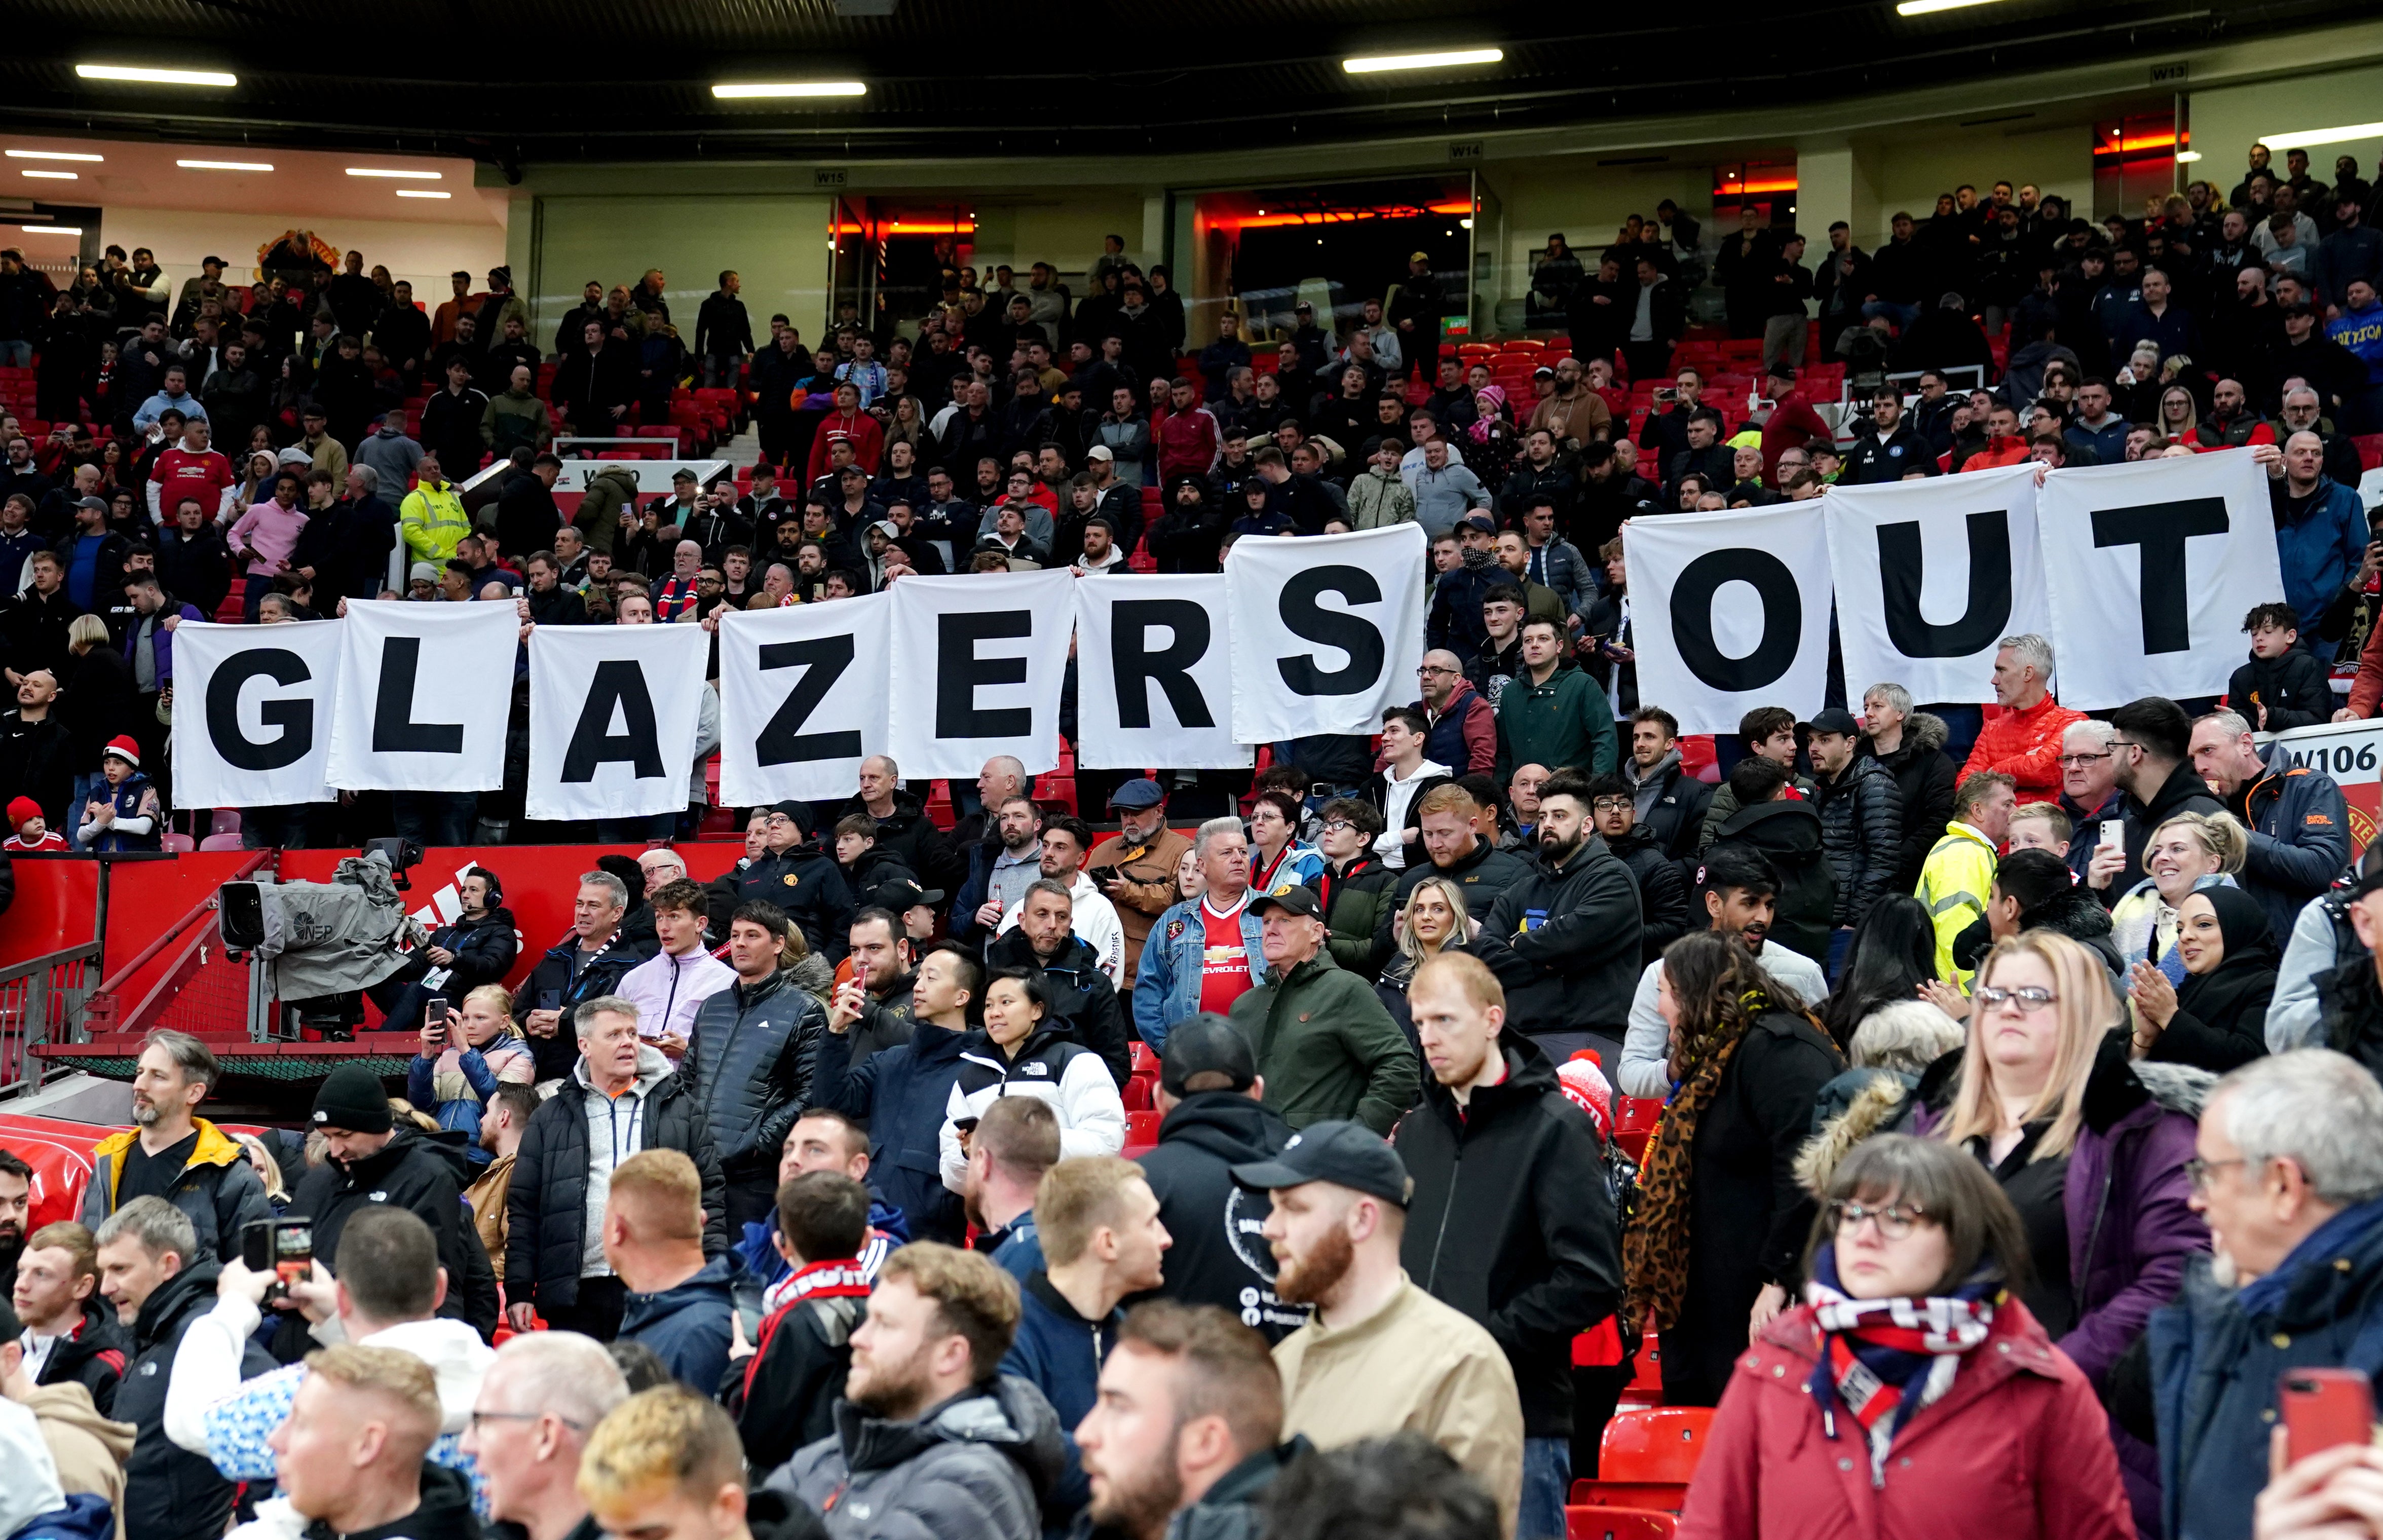 The Manchester United Supporters’ Trust believes failure is being rewarded at Old Trafford (Martin Rickett/PA)